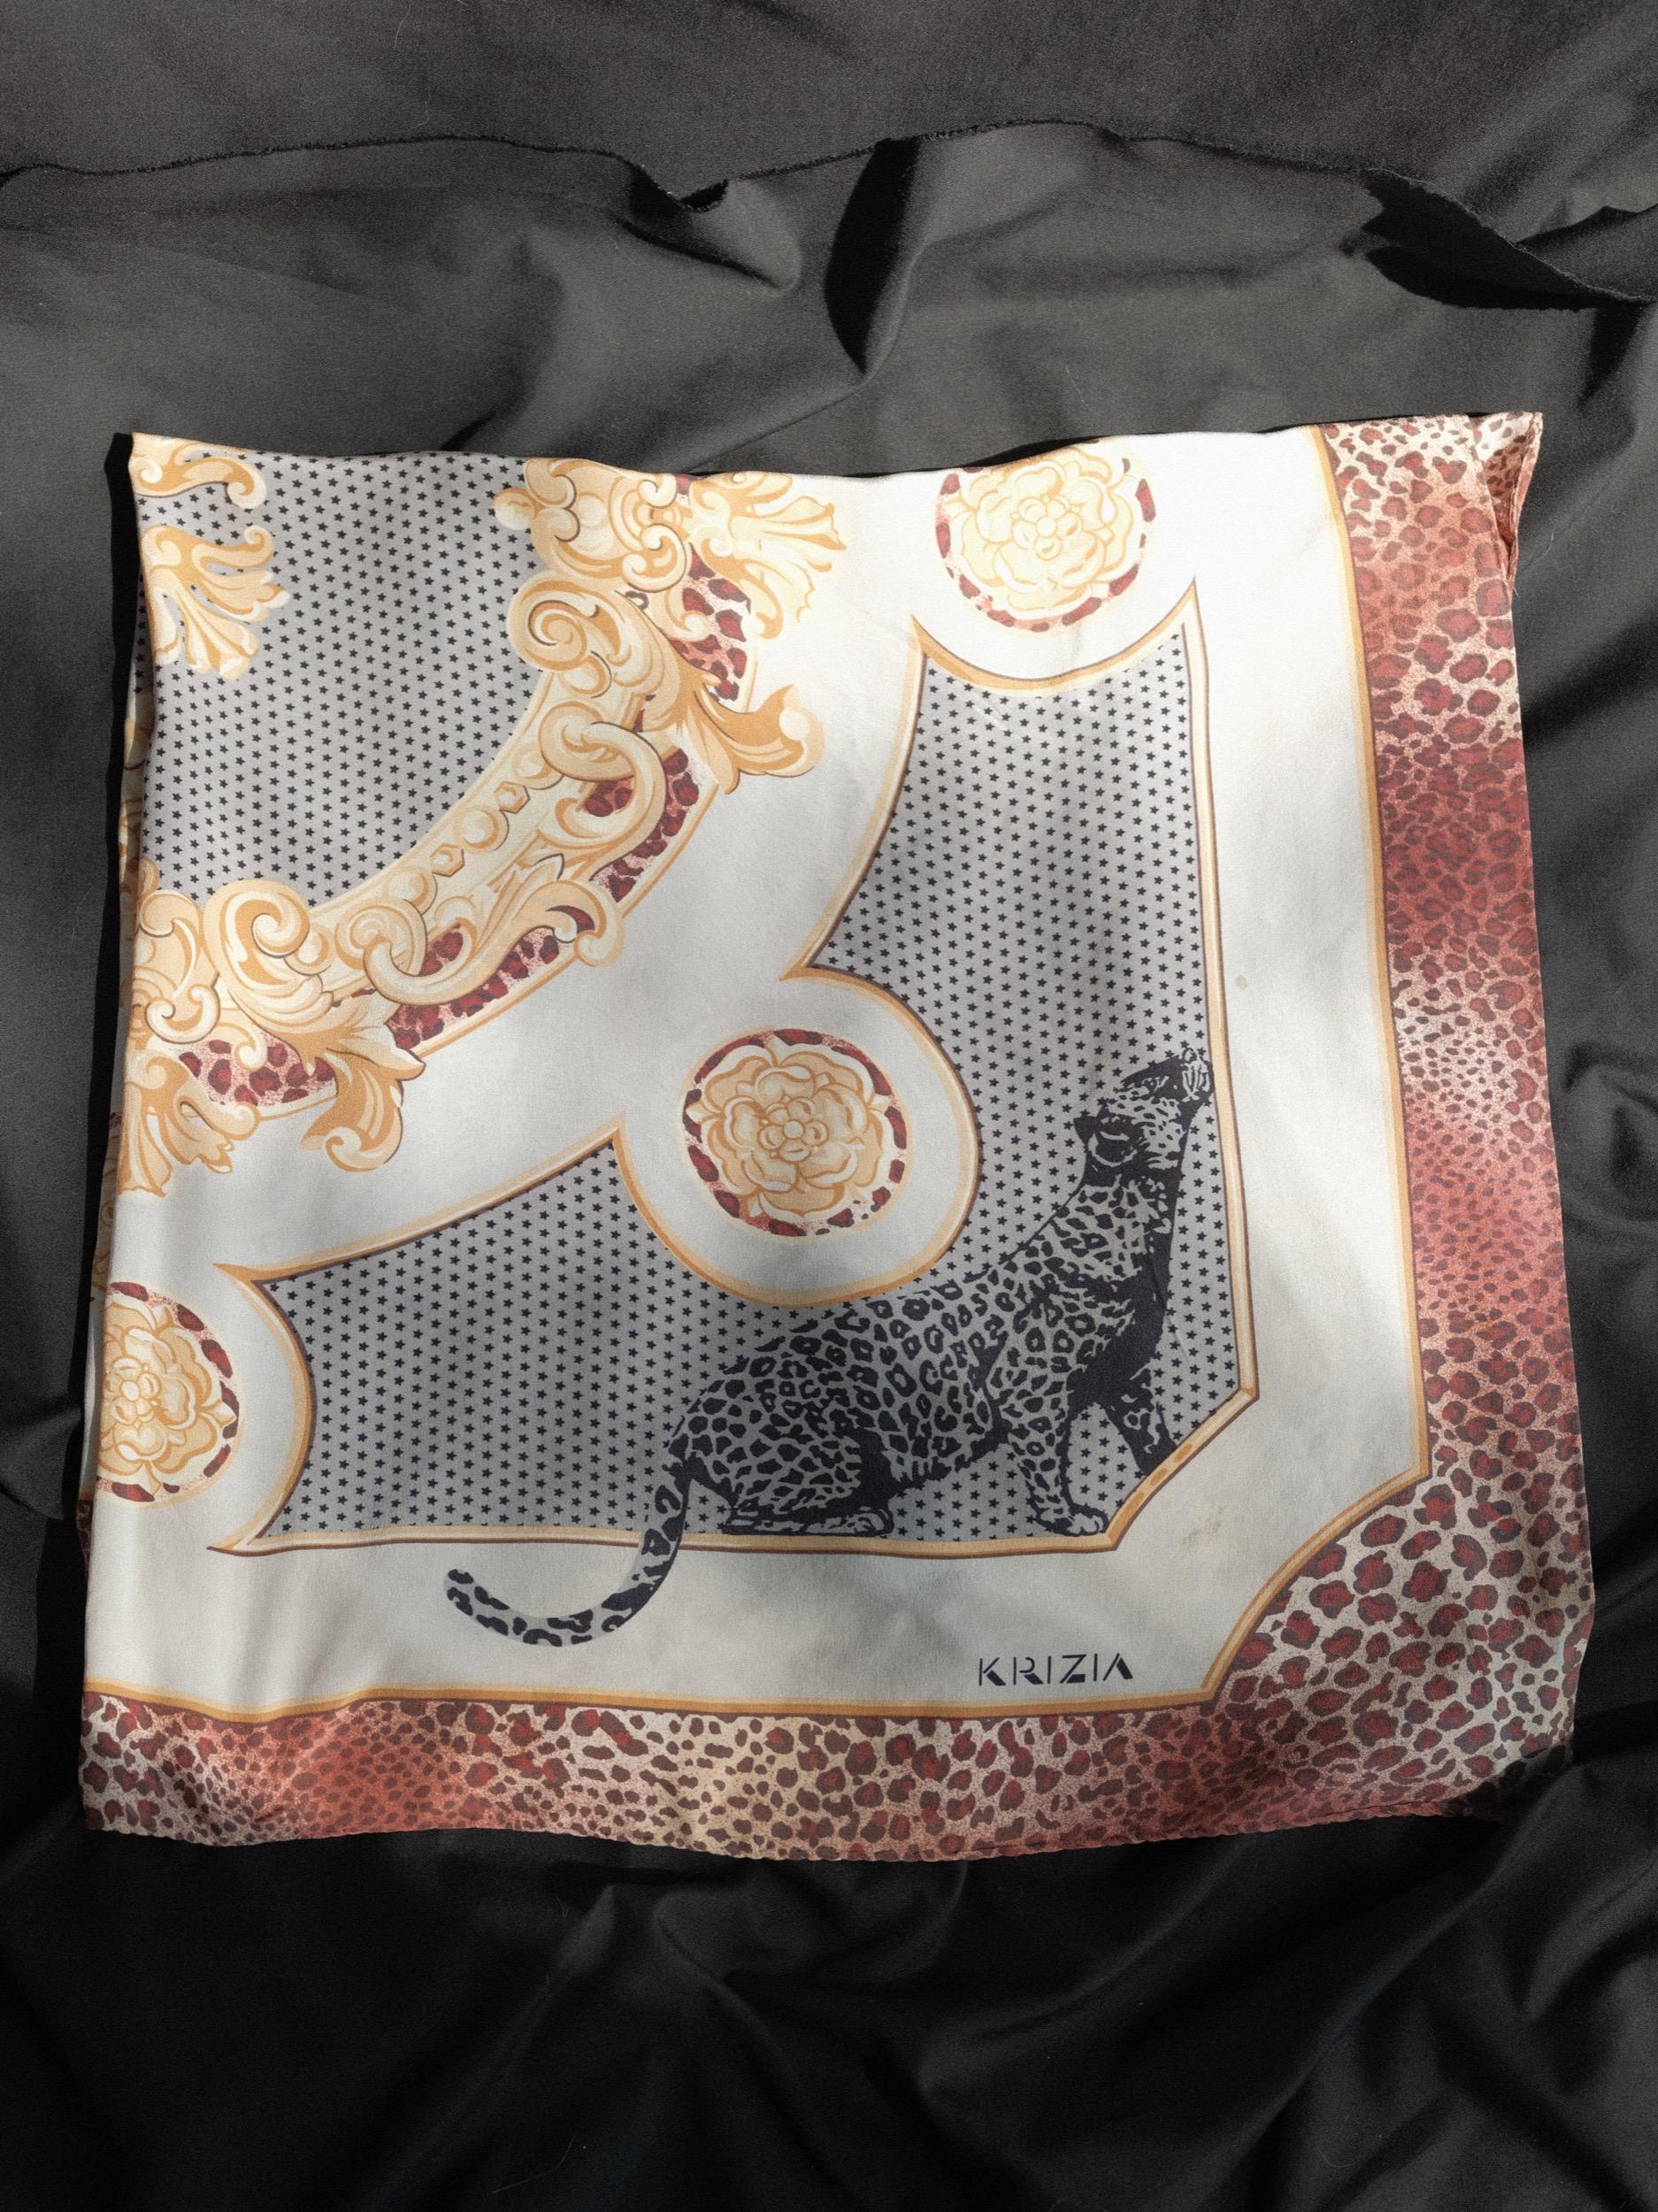 Krizia Silk Scarf 
Quintessential Krizia leopard motif, with star and floral background
Hand rolled edge
Silk Crepe de Chine, very soft, slightly matte finish
35 inches x 34 inches
Small marks near logo and right side of scarf, please refer to